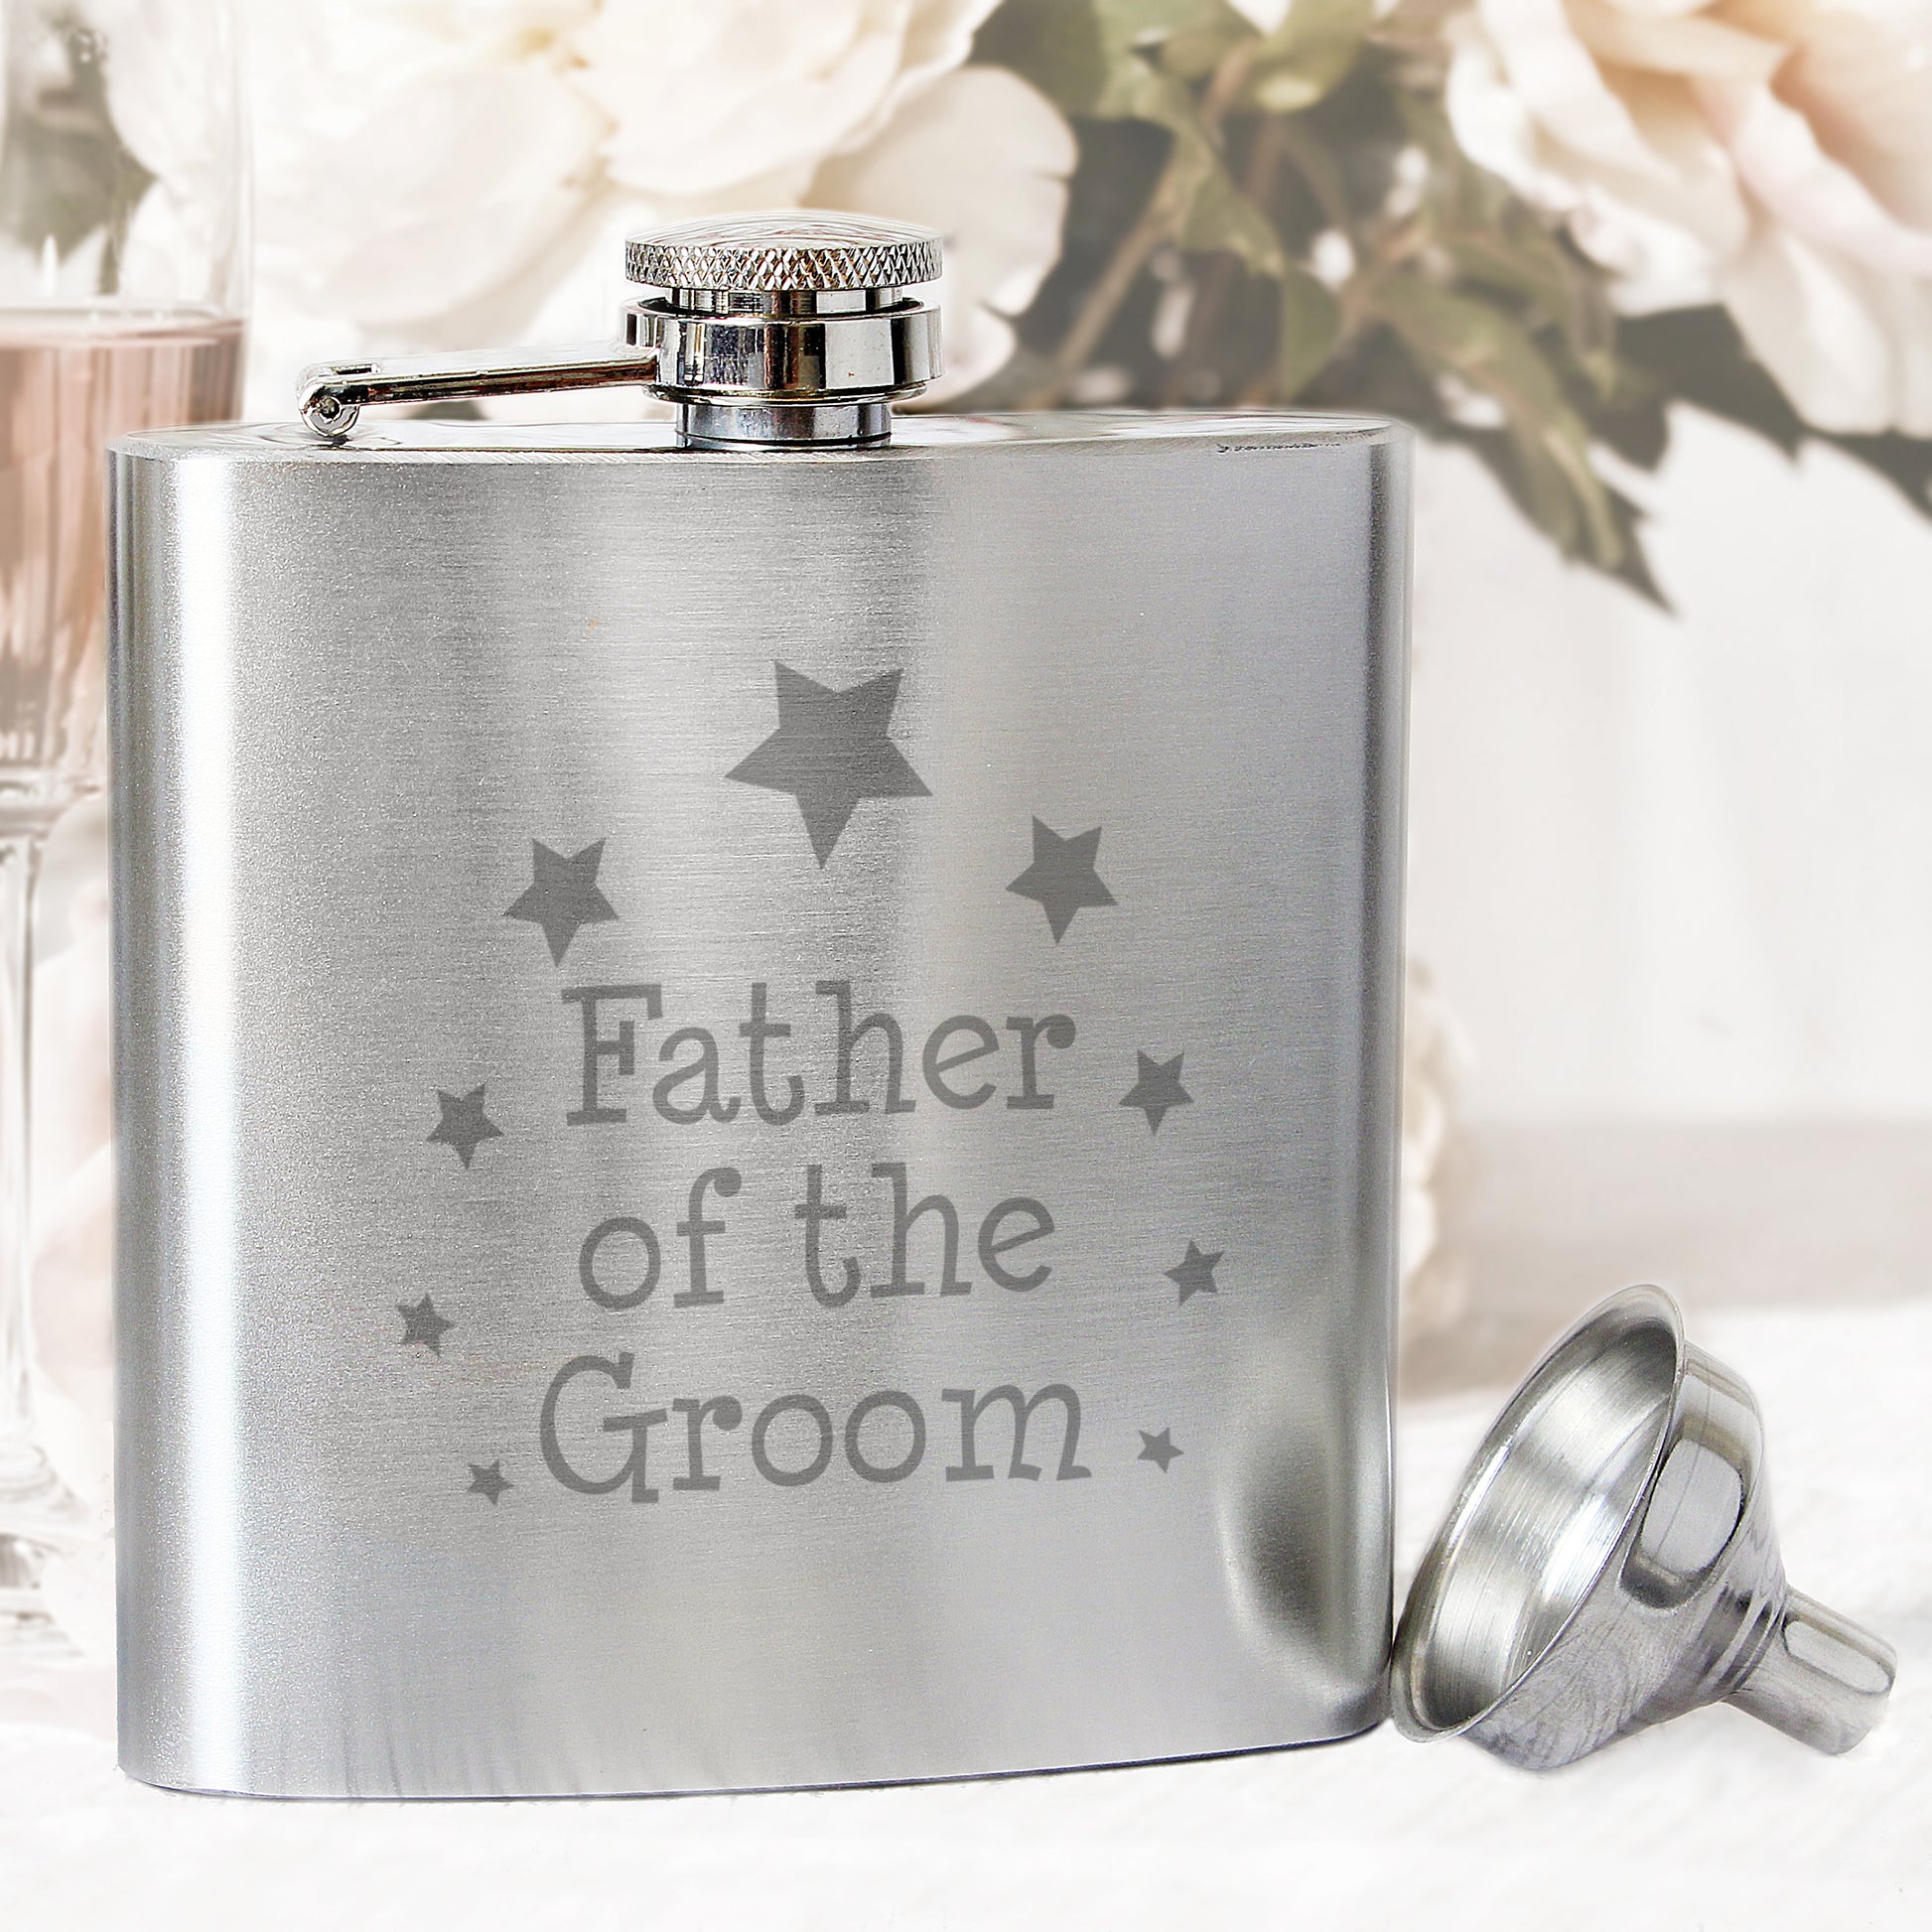 Father of the Froom personalised hip flask with star pattern. Comes with its own funnel for ease of filling. Personalise with your own message.